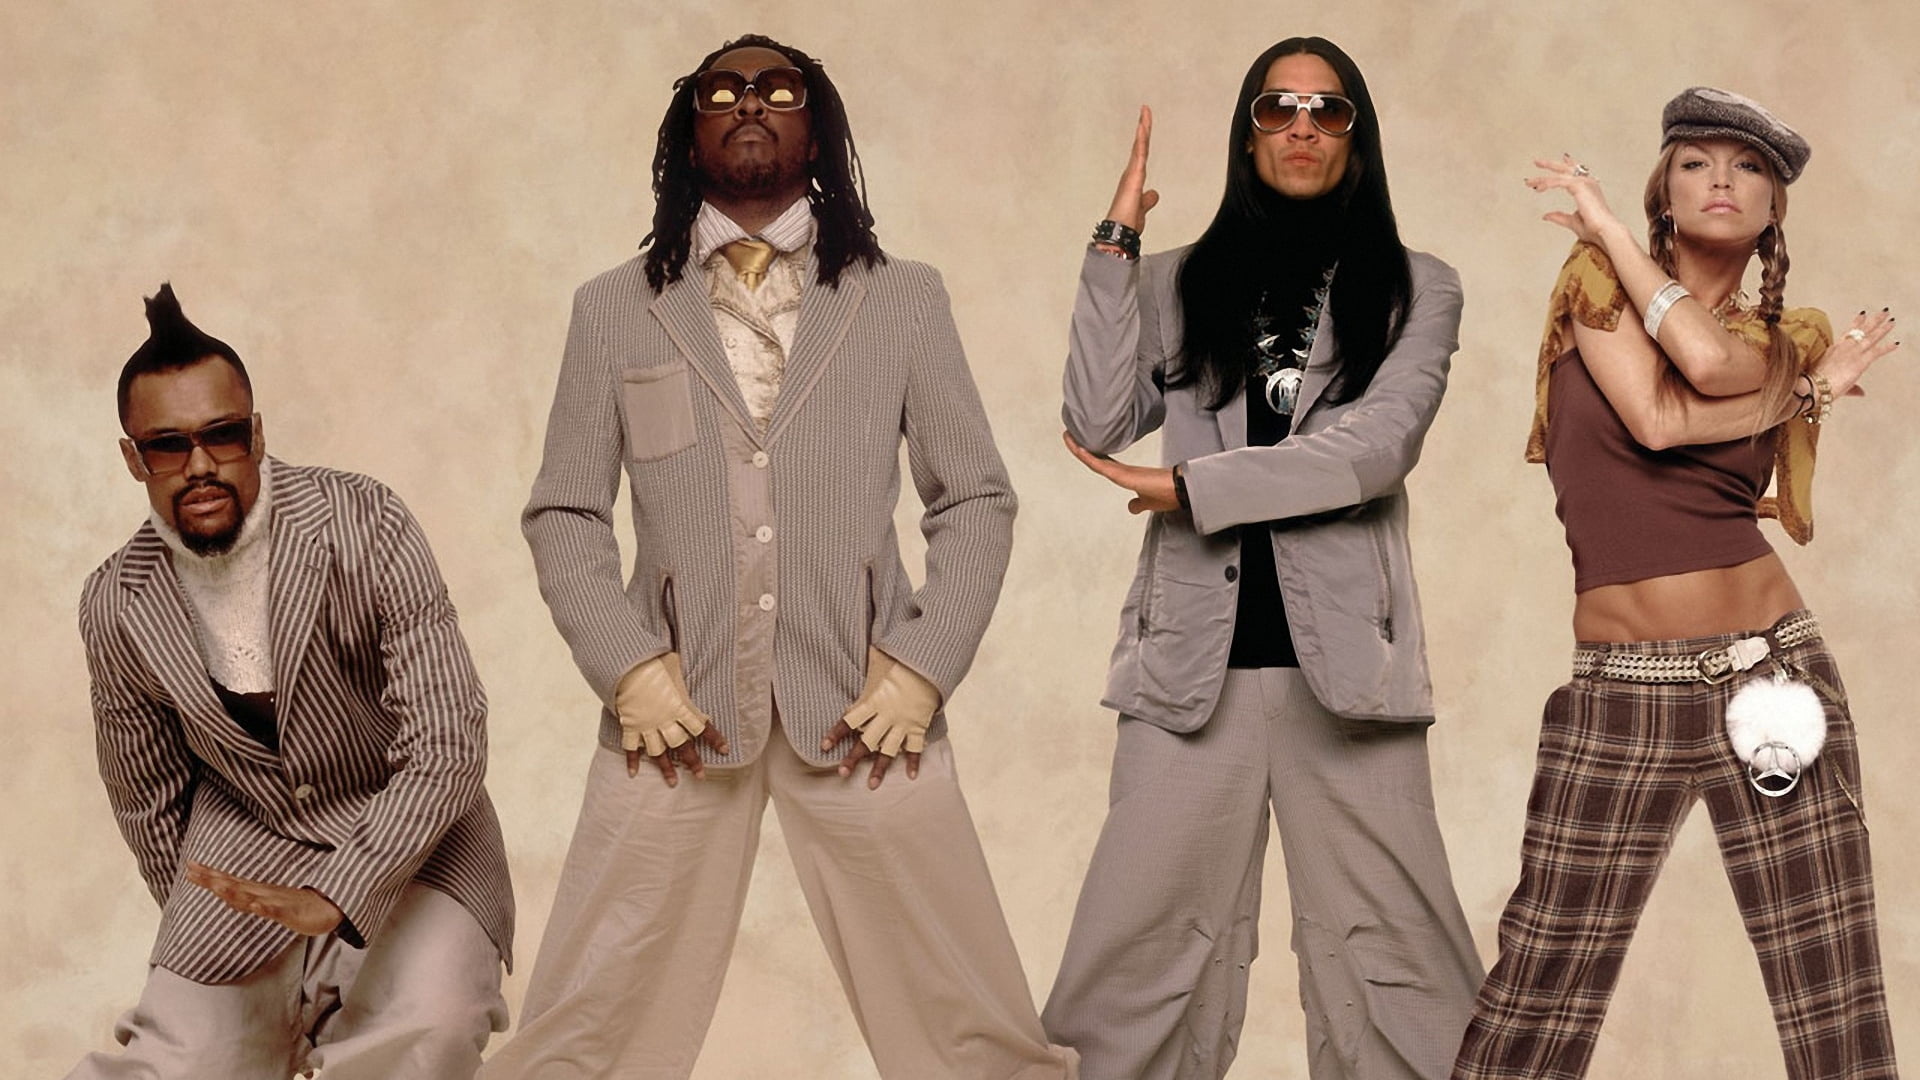 The Black Eyed Peas: Hit singles “Don't Phunk with My Heart” and “My Humps”, Triple platinum in the U.S.. 1920x1080 Full HD Wallpaper.